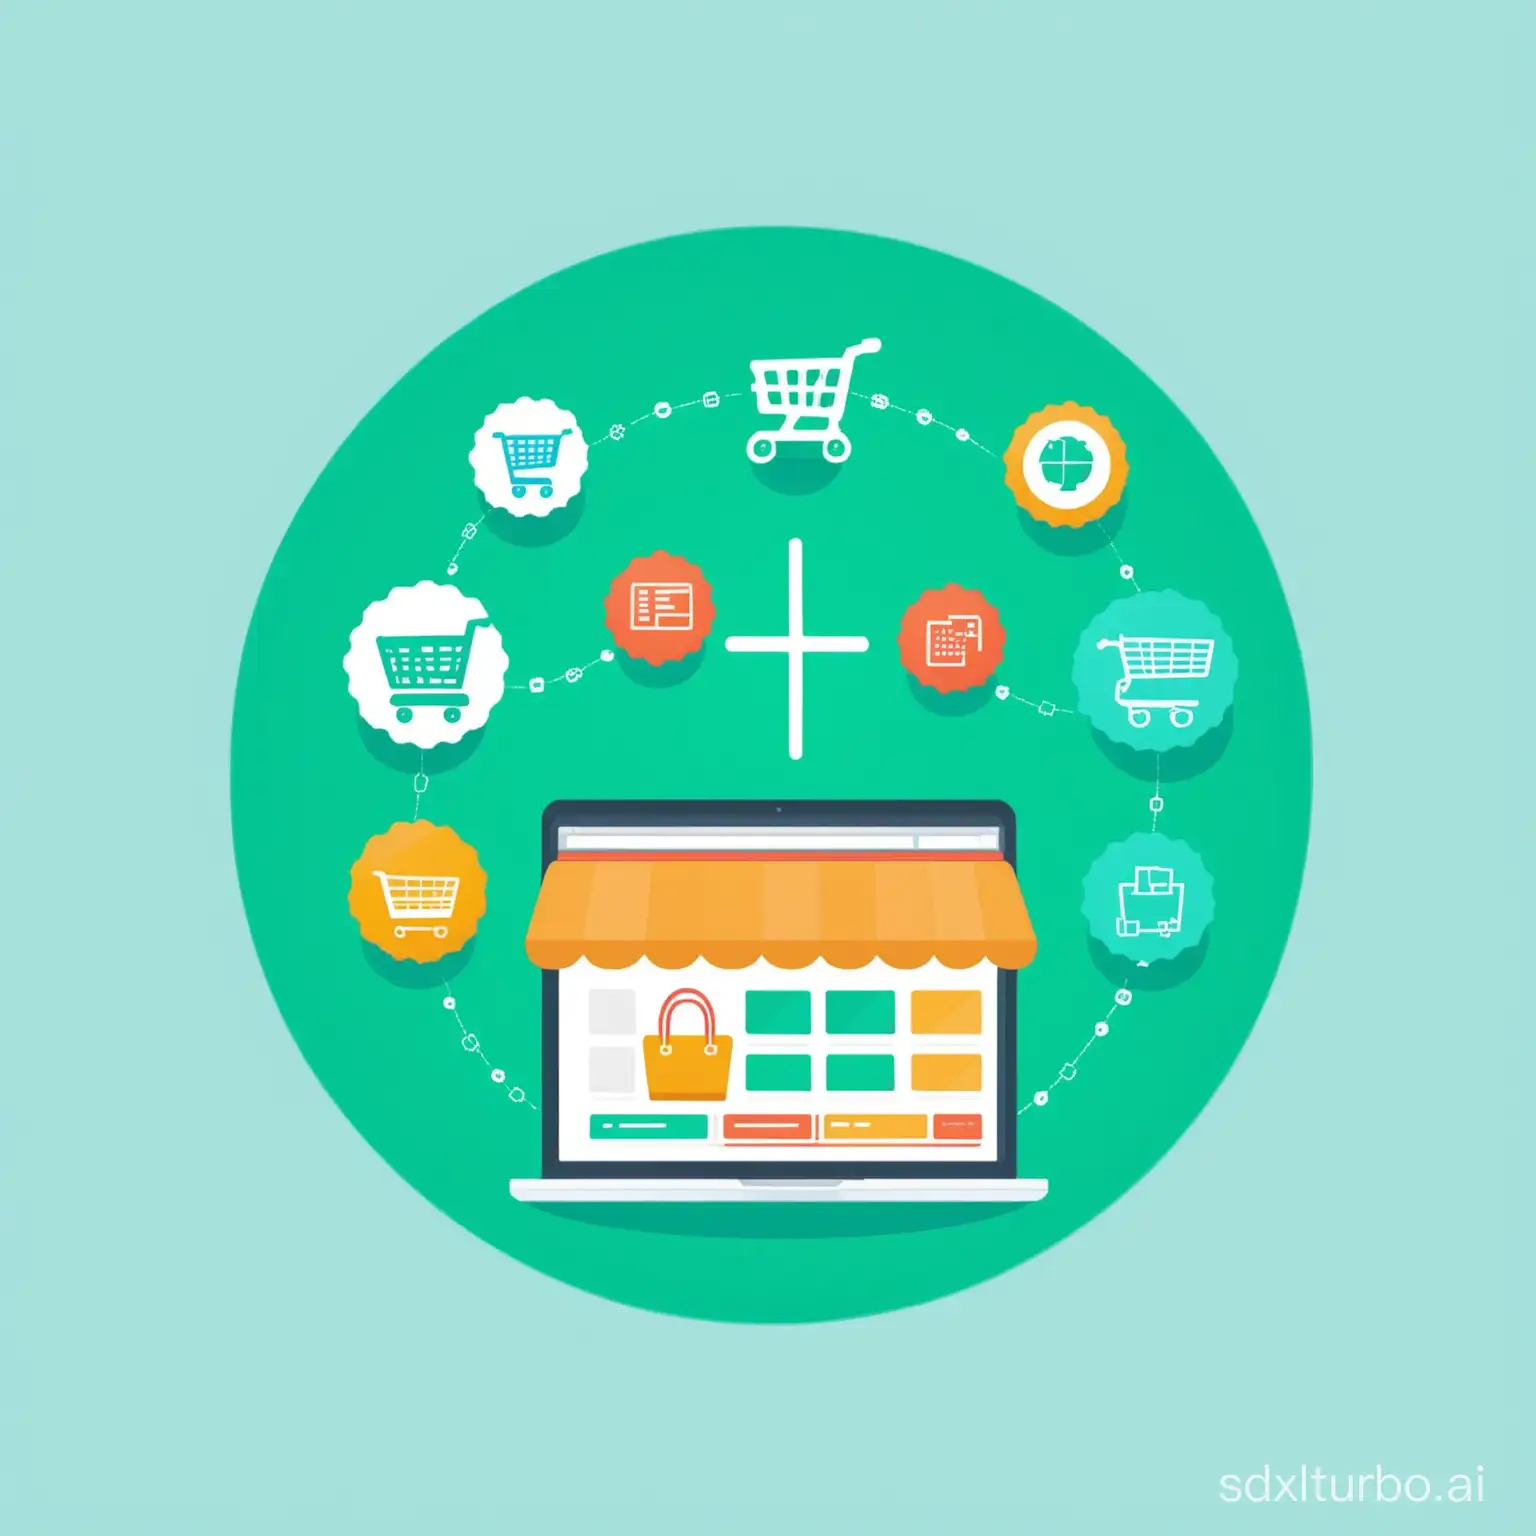 Generate an e-commerce software industry image with 'Cross-border E-commerce Assistant'.